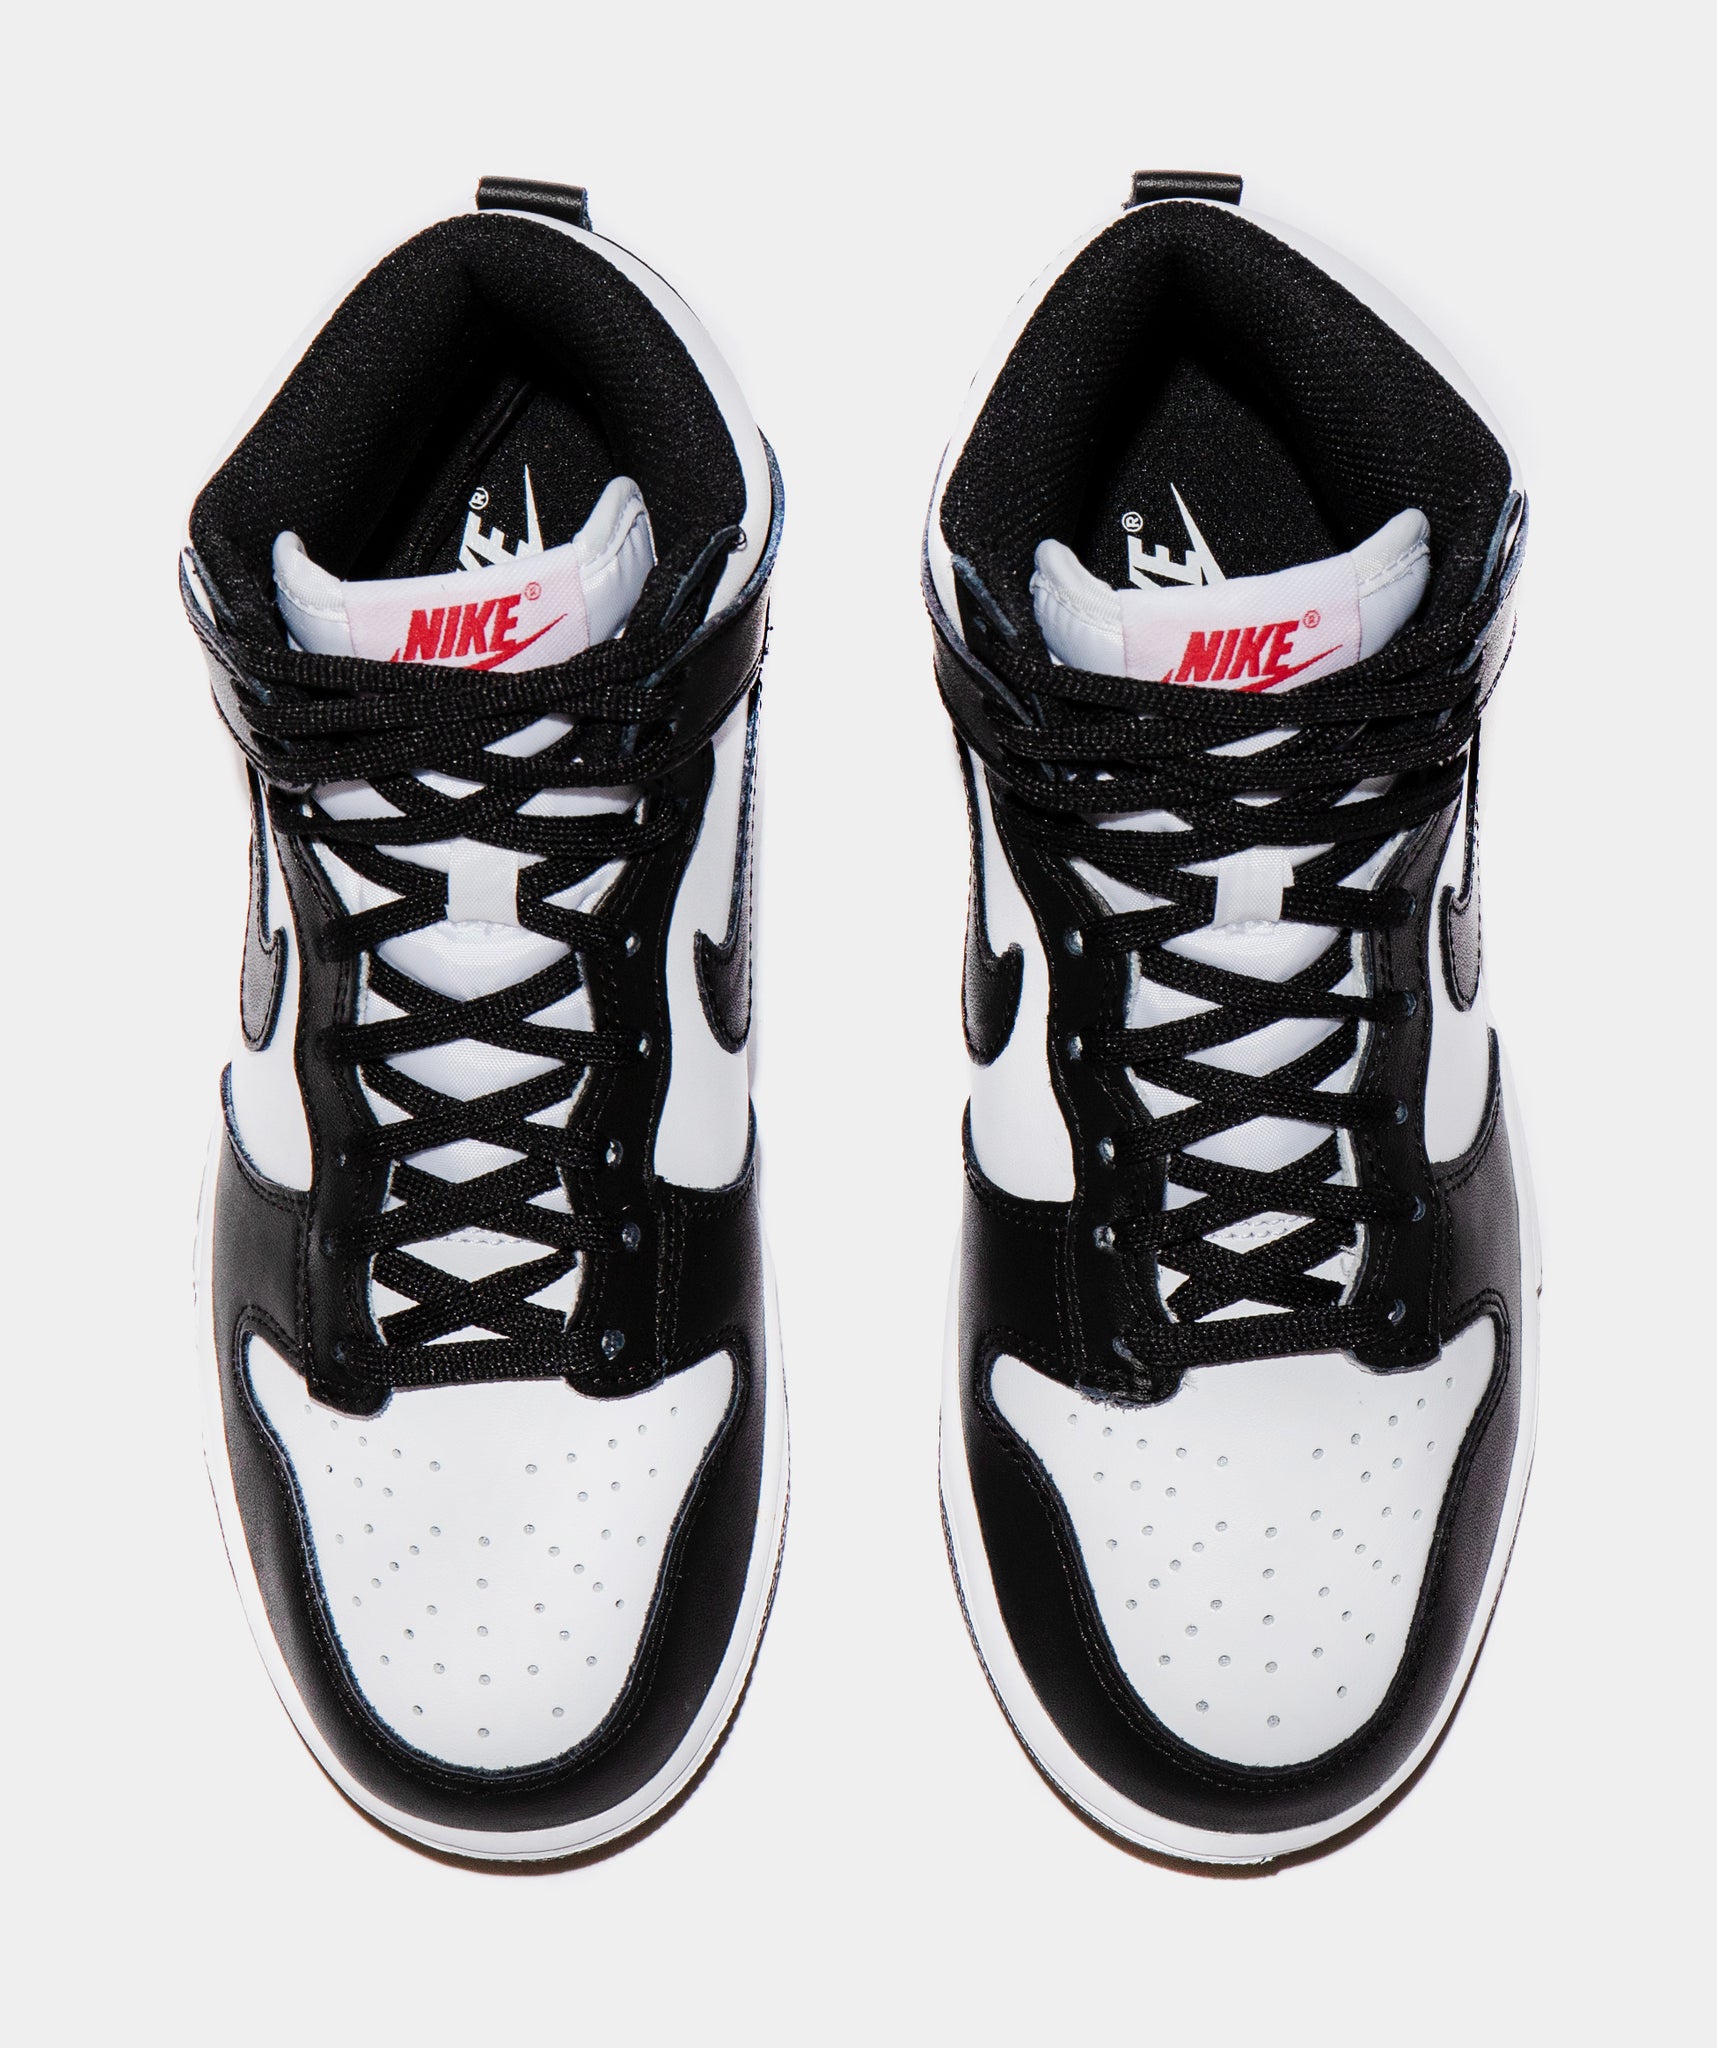 Dunk High Womens Lifestyle Shoes (Black/White)